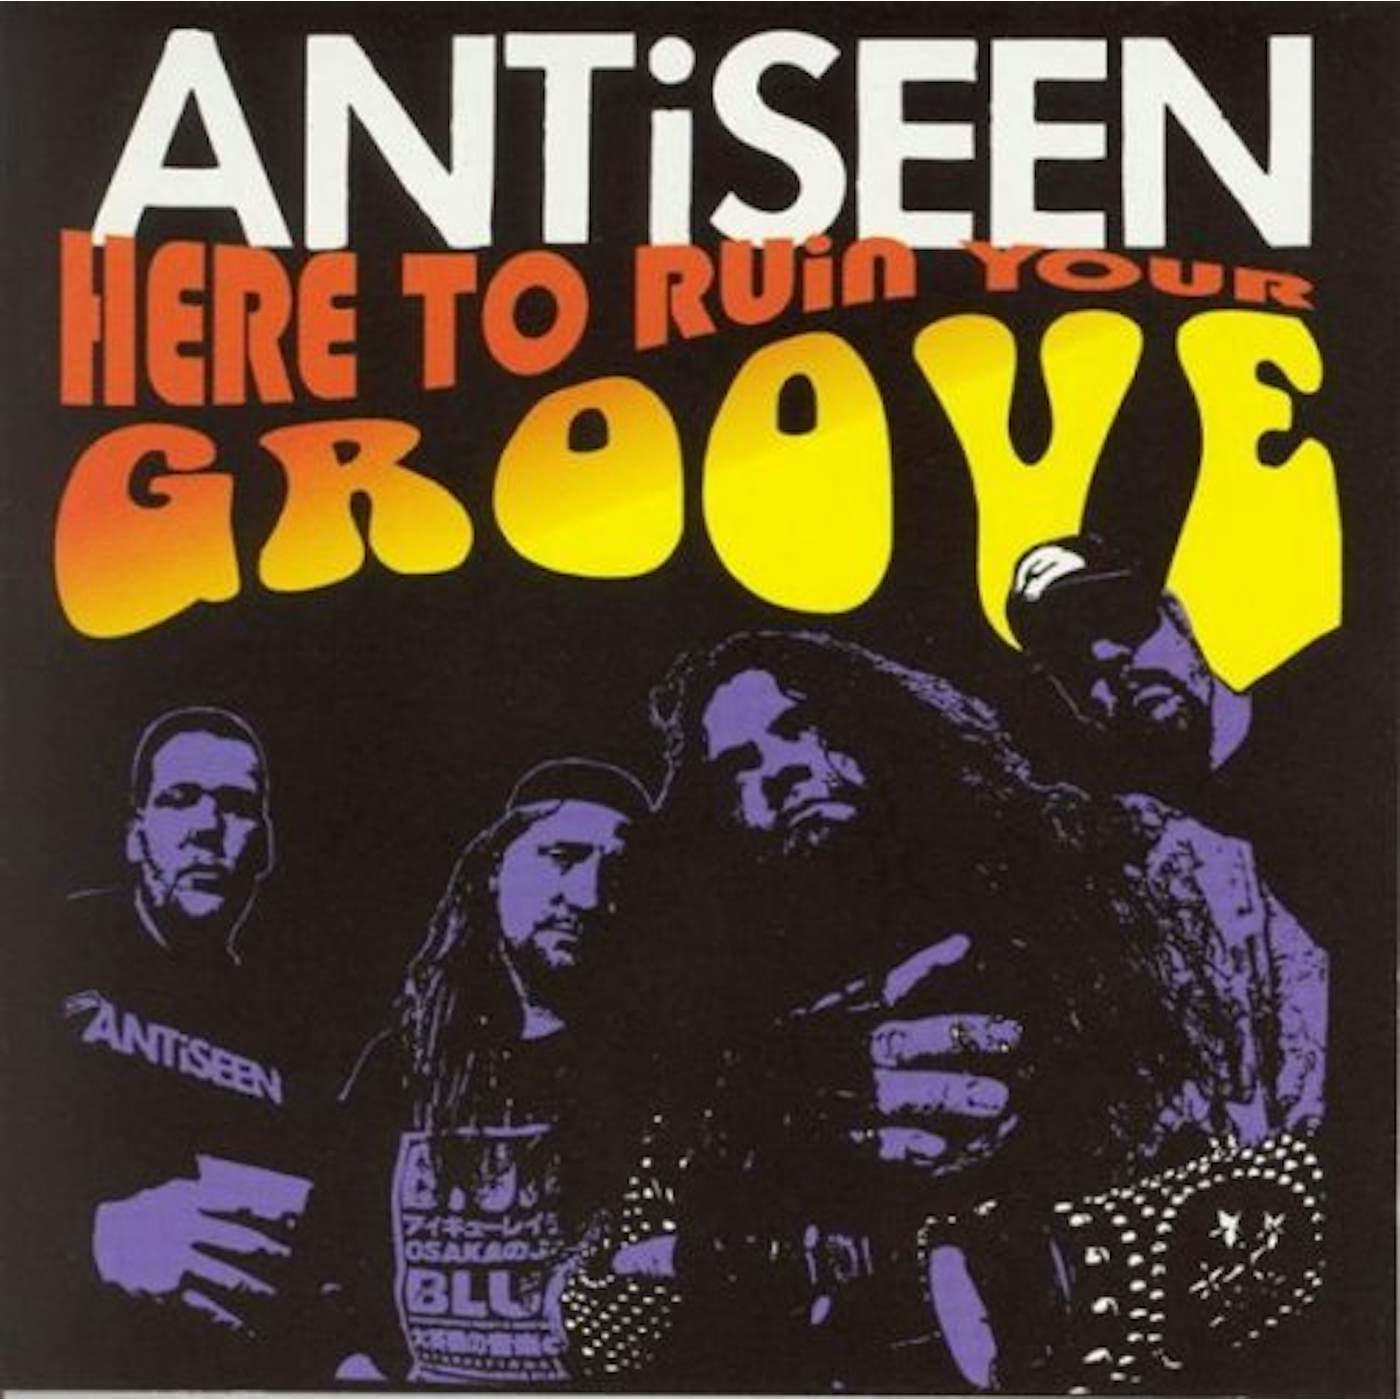 Antiseen HERE TO RUIN YOUR GROOVE CD